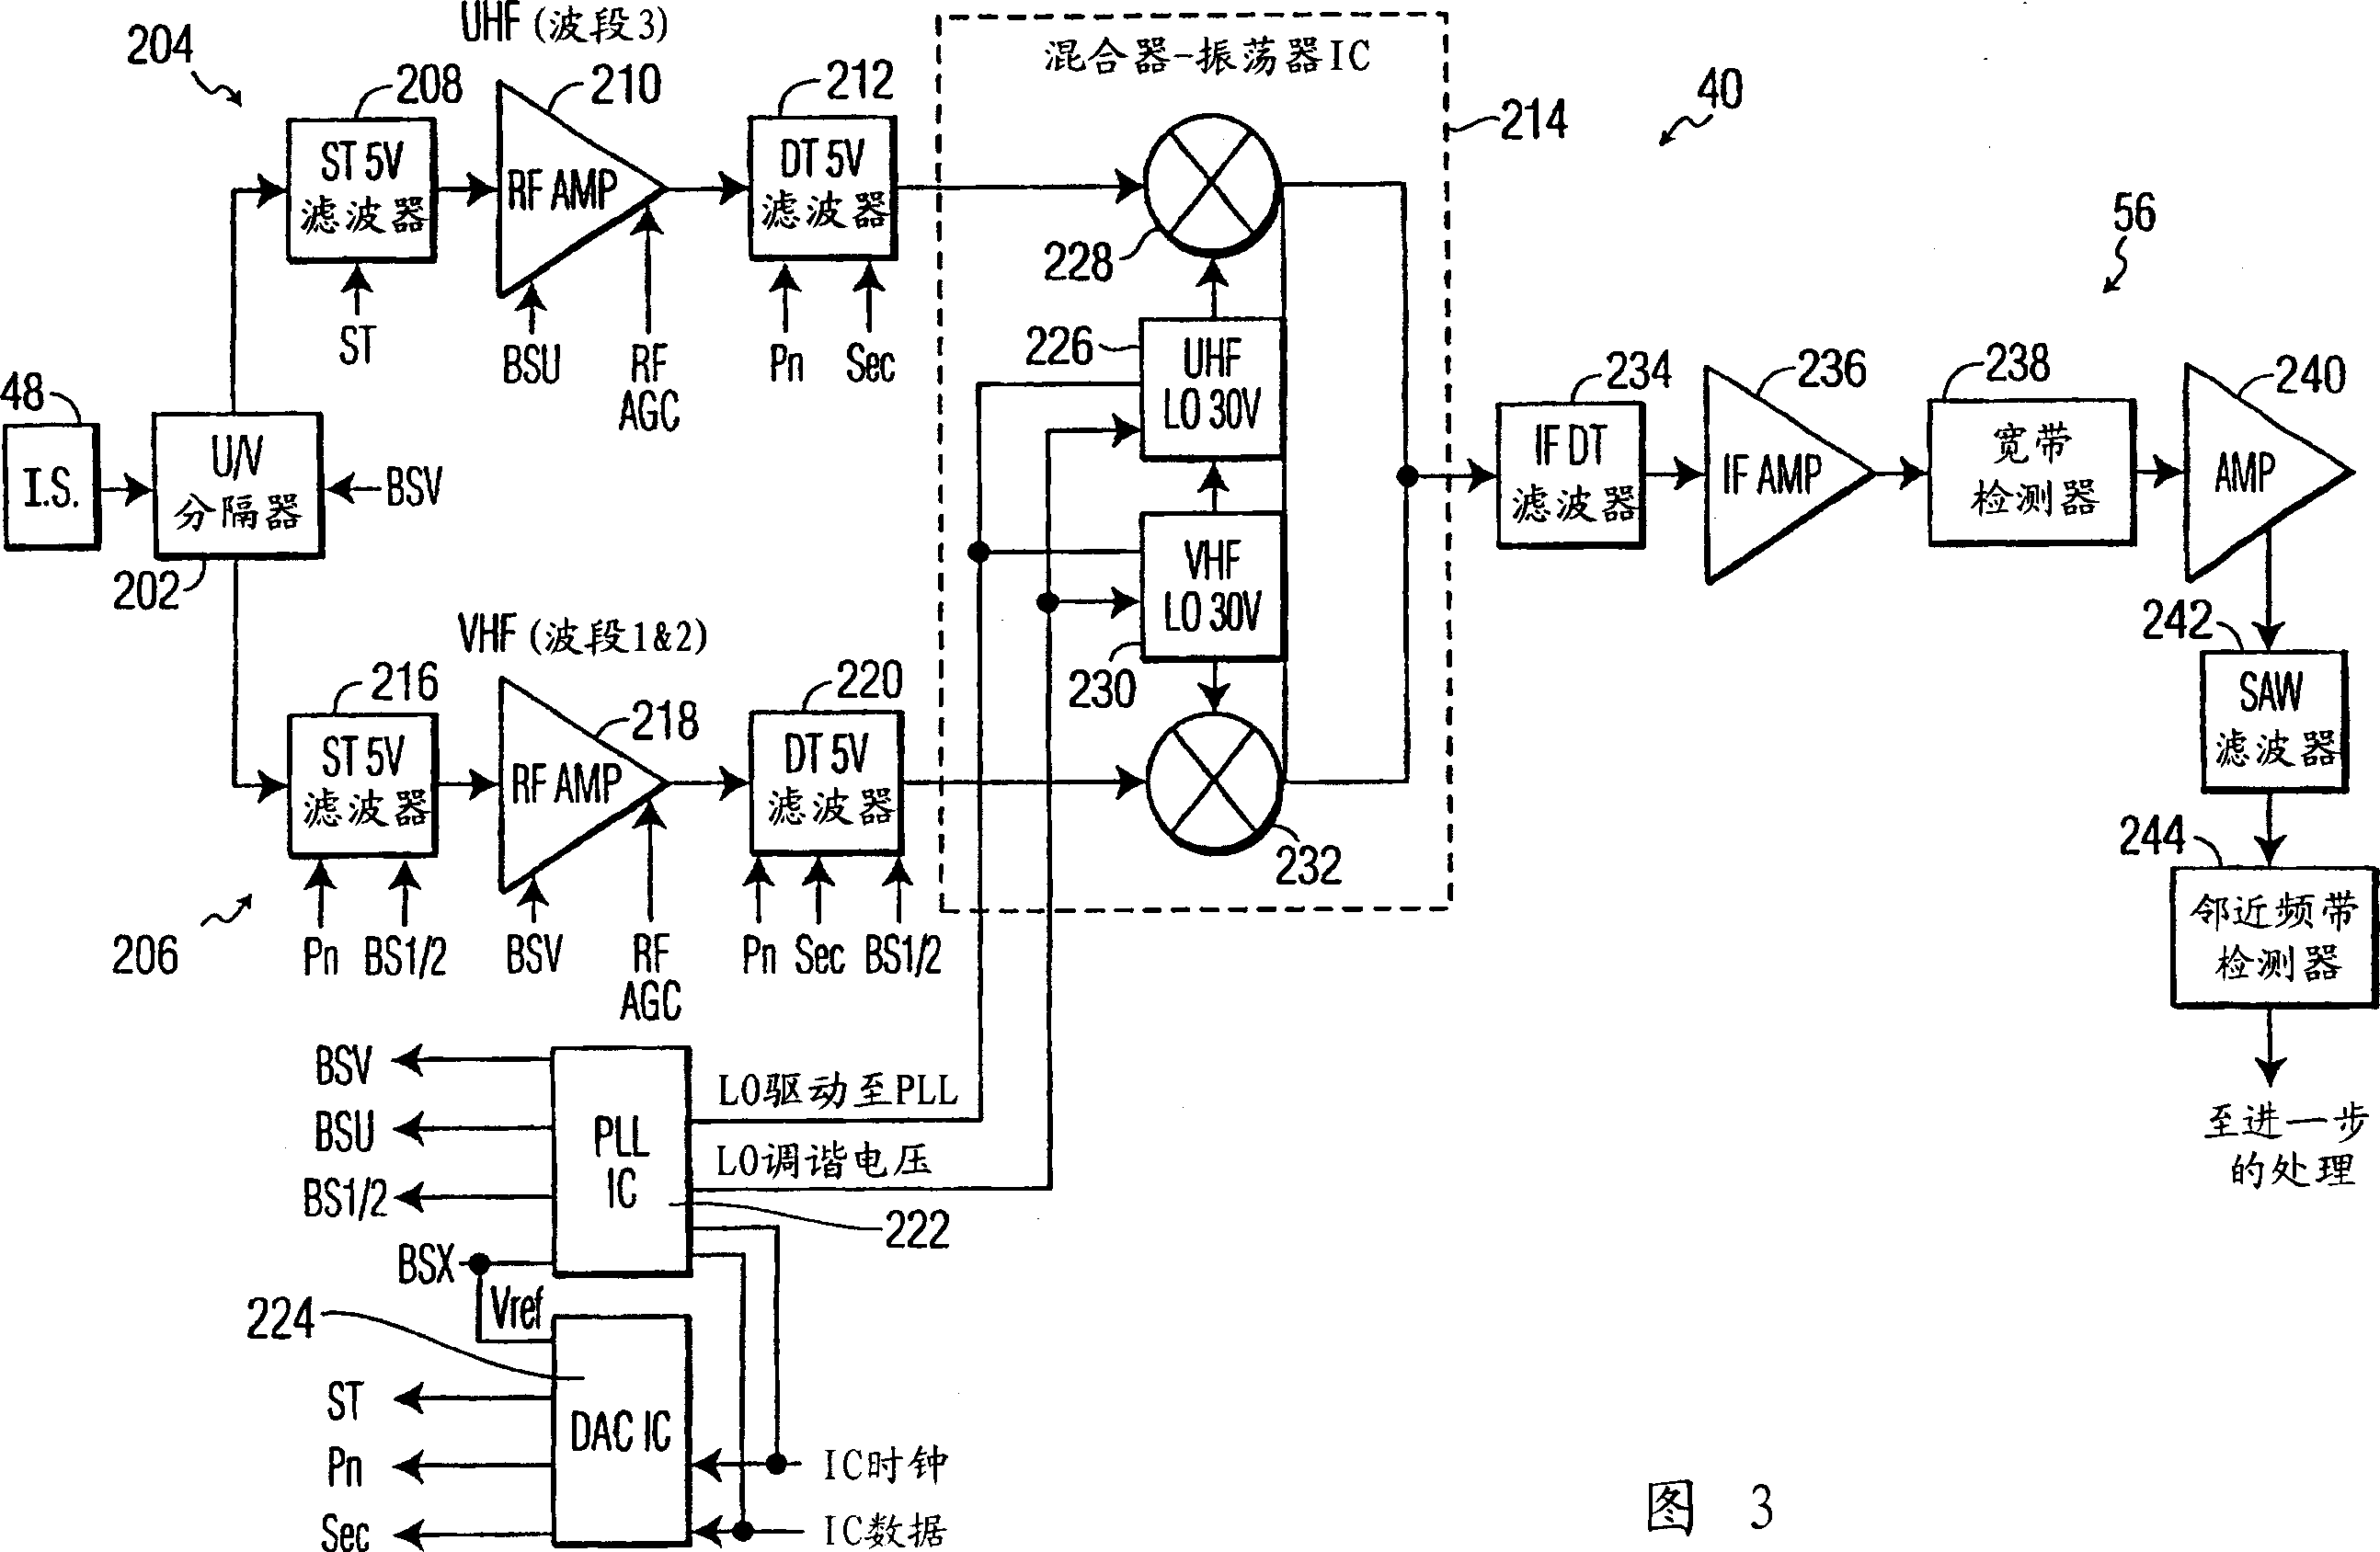 Tuner input filter with electronically adjustable center frequency for adapting to antenna characteristic